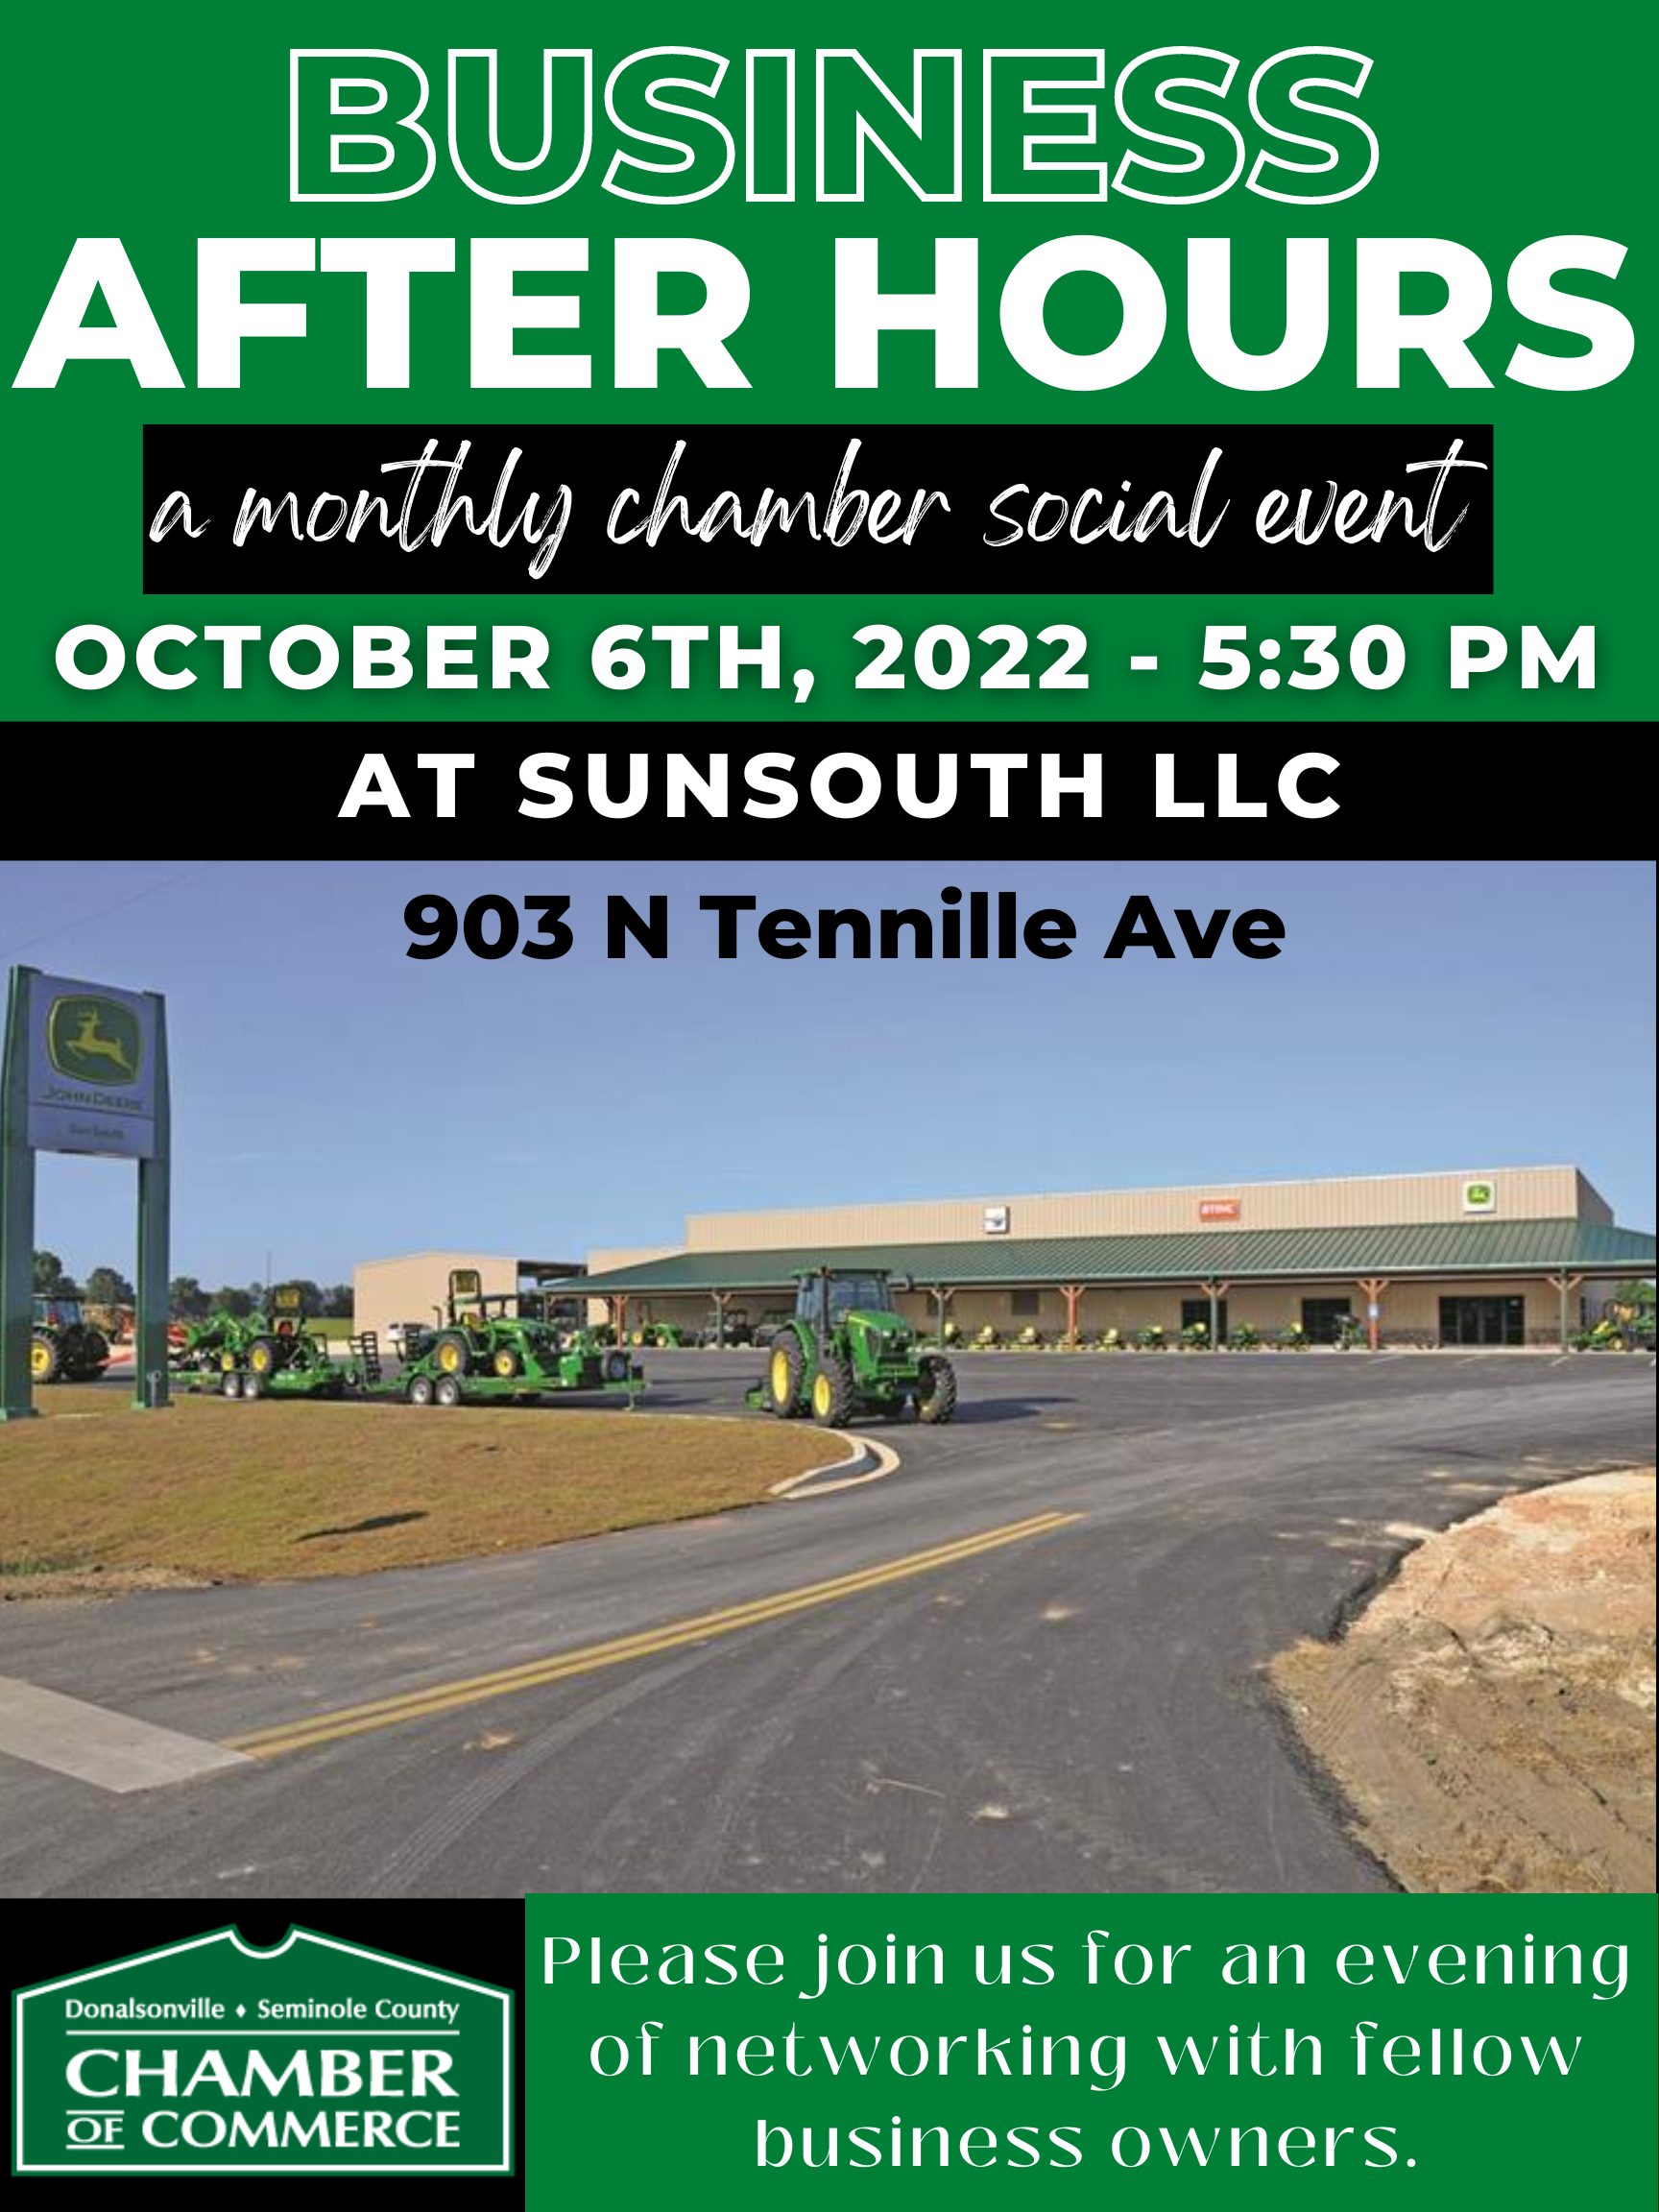 Business After Hours: SunSouth LLC